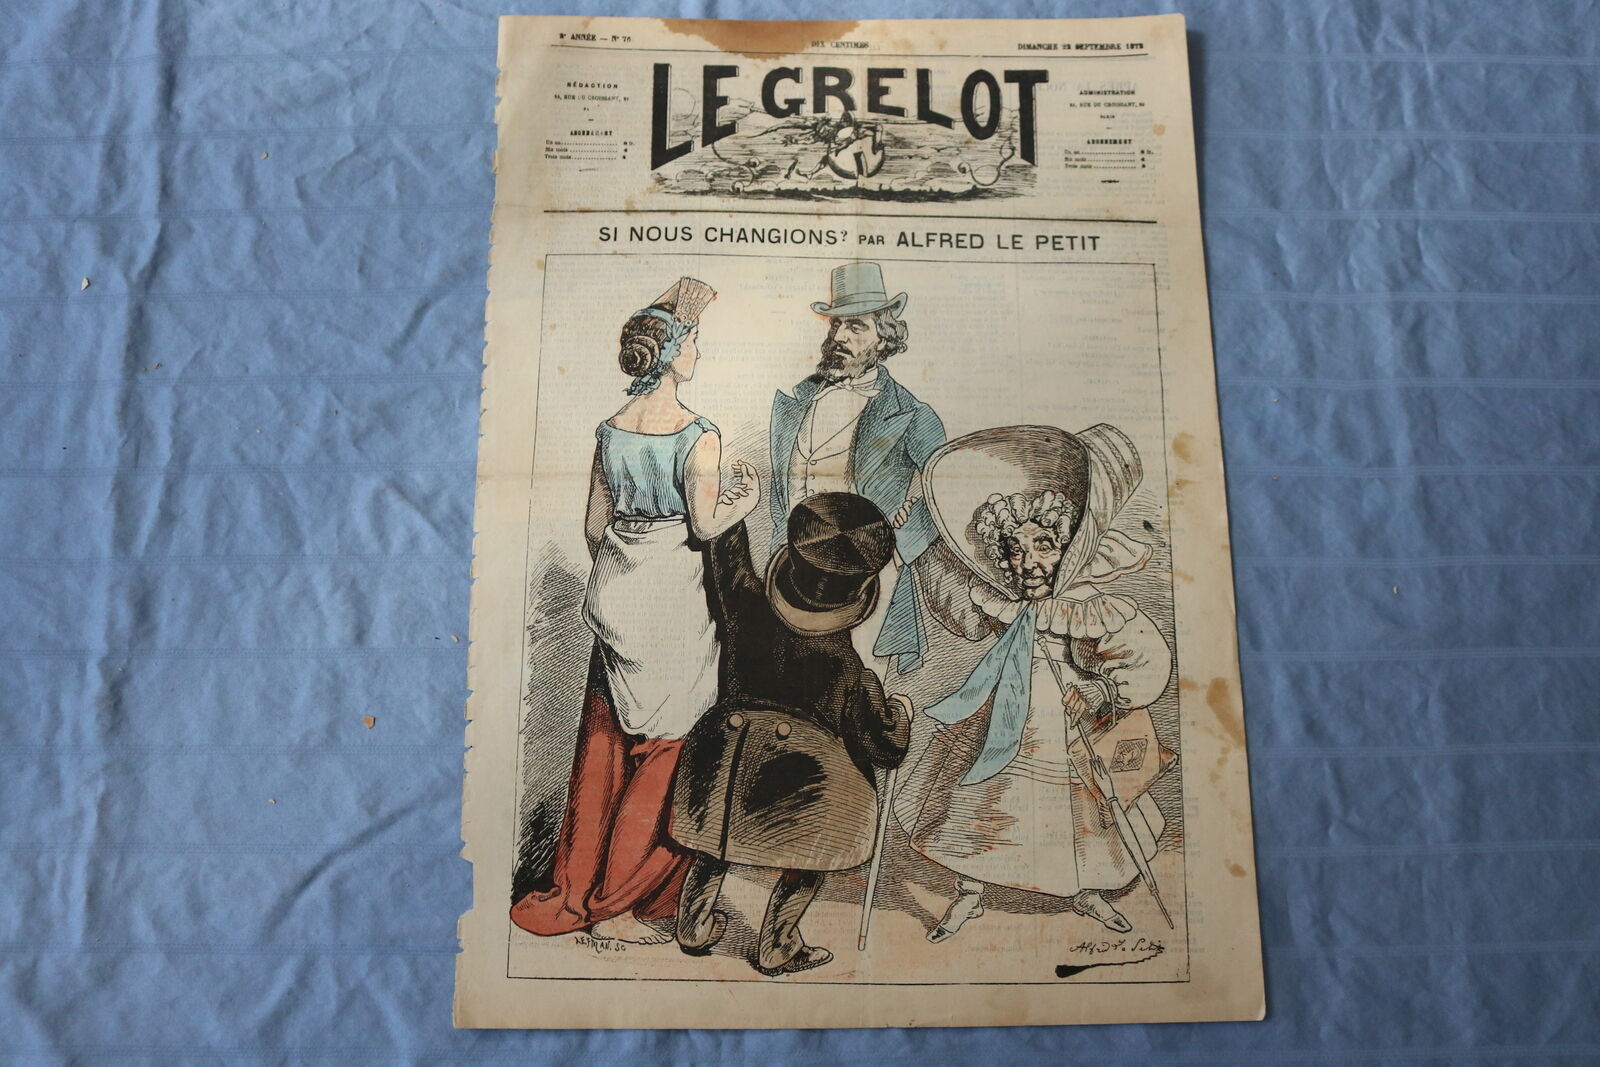 1872 SEPTEMBER 22 LE GRELOT NEWSPAPER - SI NOUS CHANGIONS? - FRENCH - NP 8601